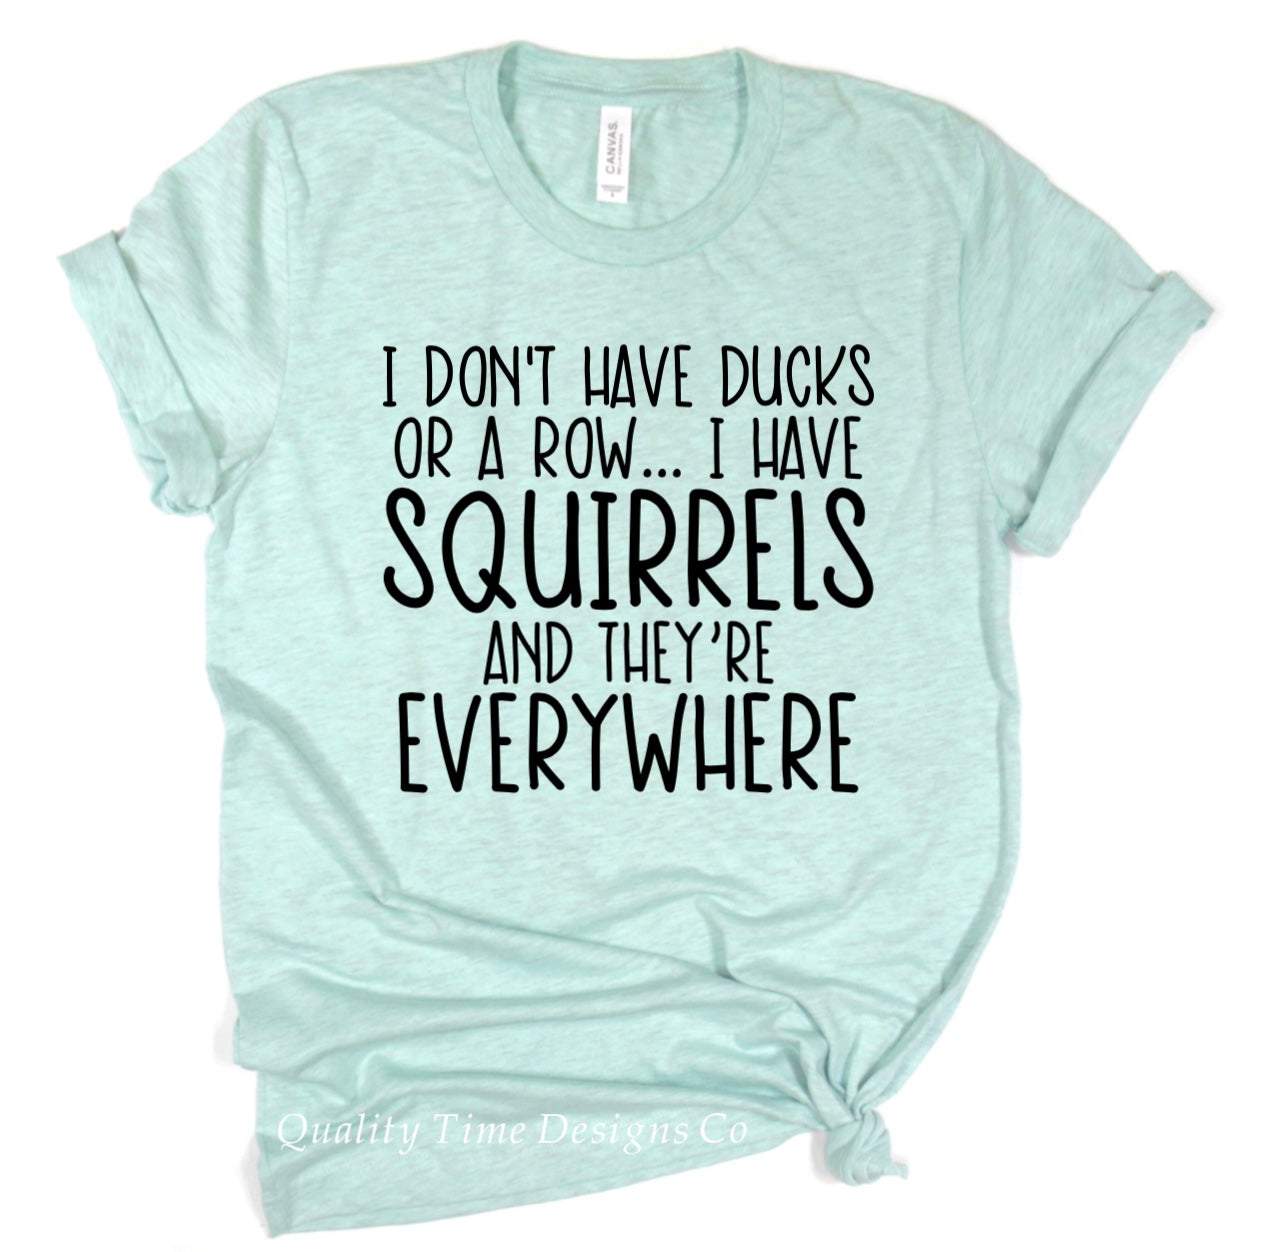 I don’t have ducks or a row I have squirrels and they’re everywhere t-shirt 